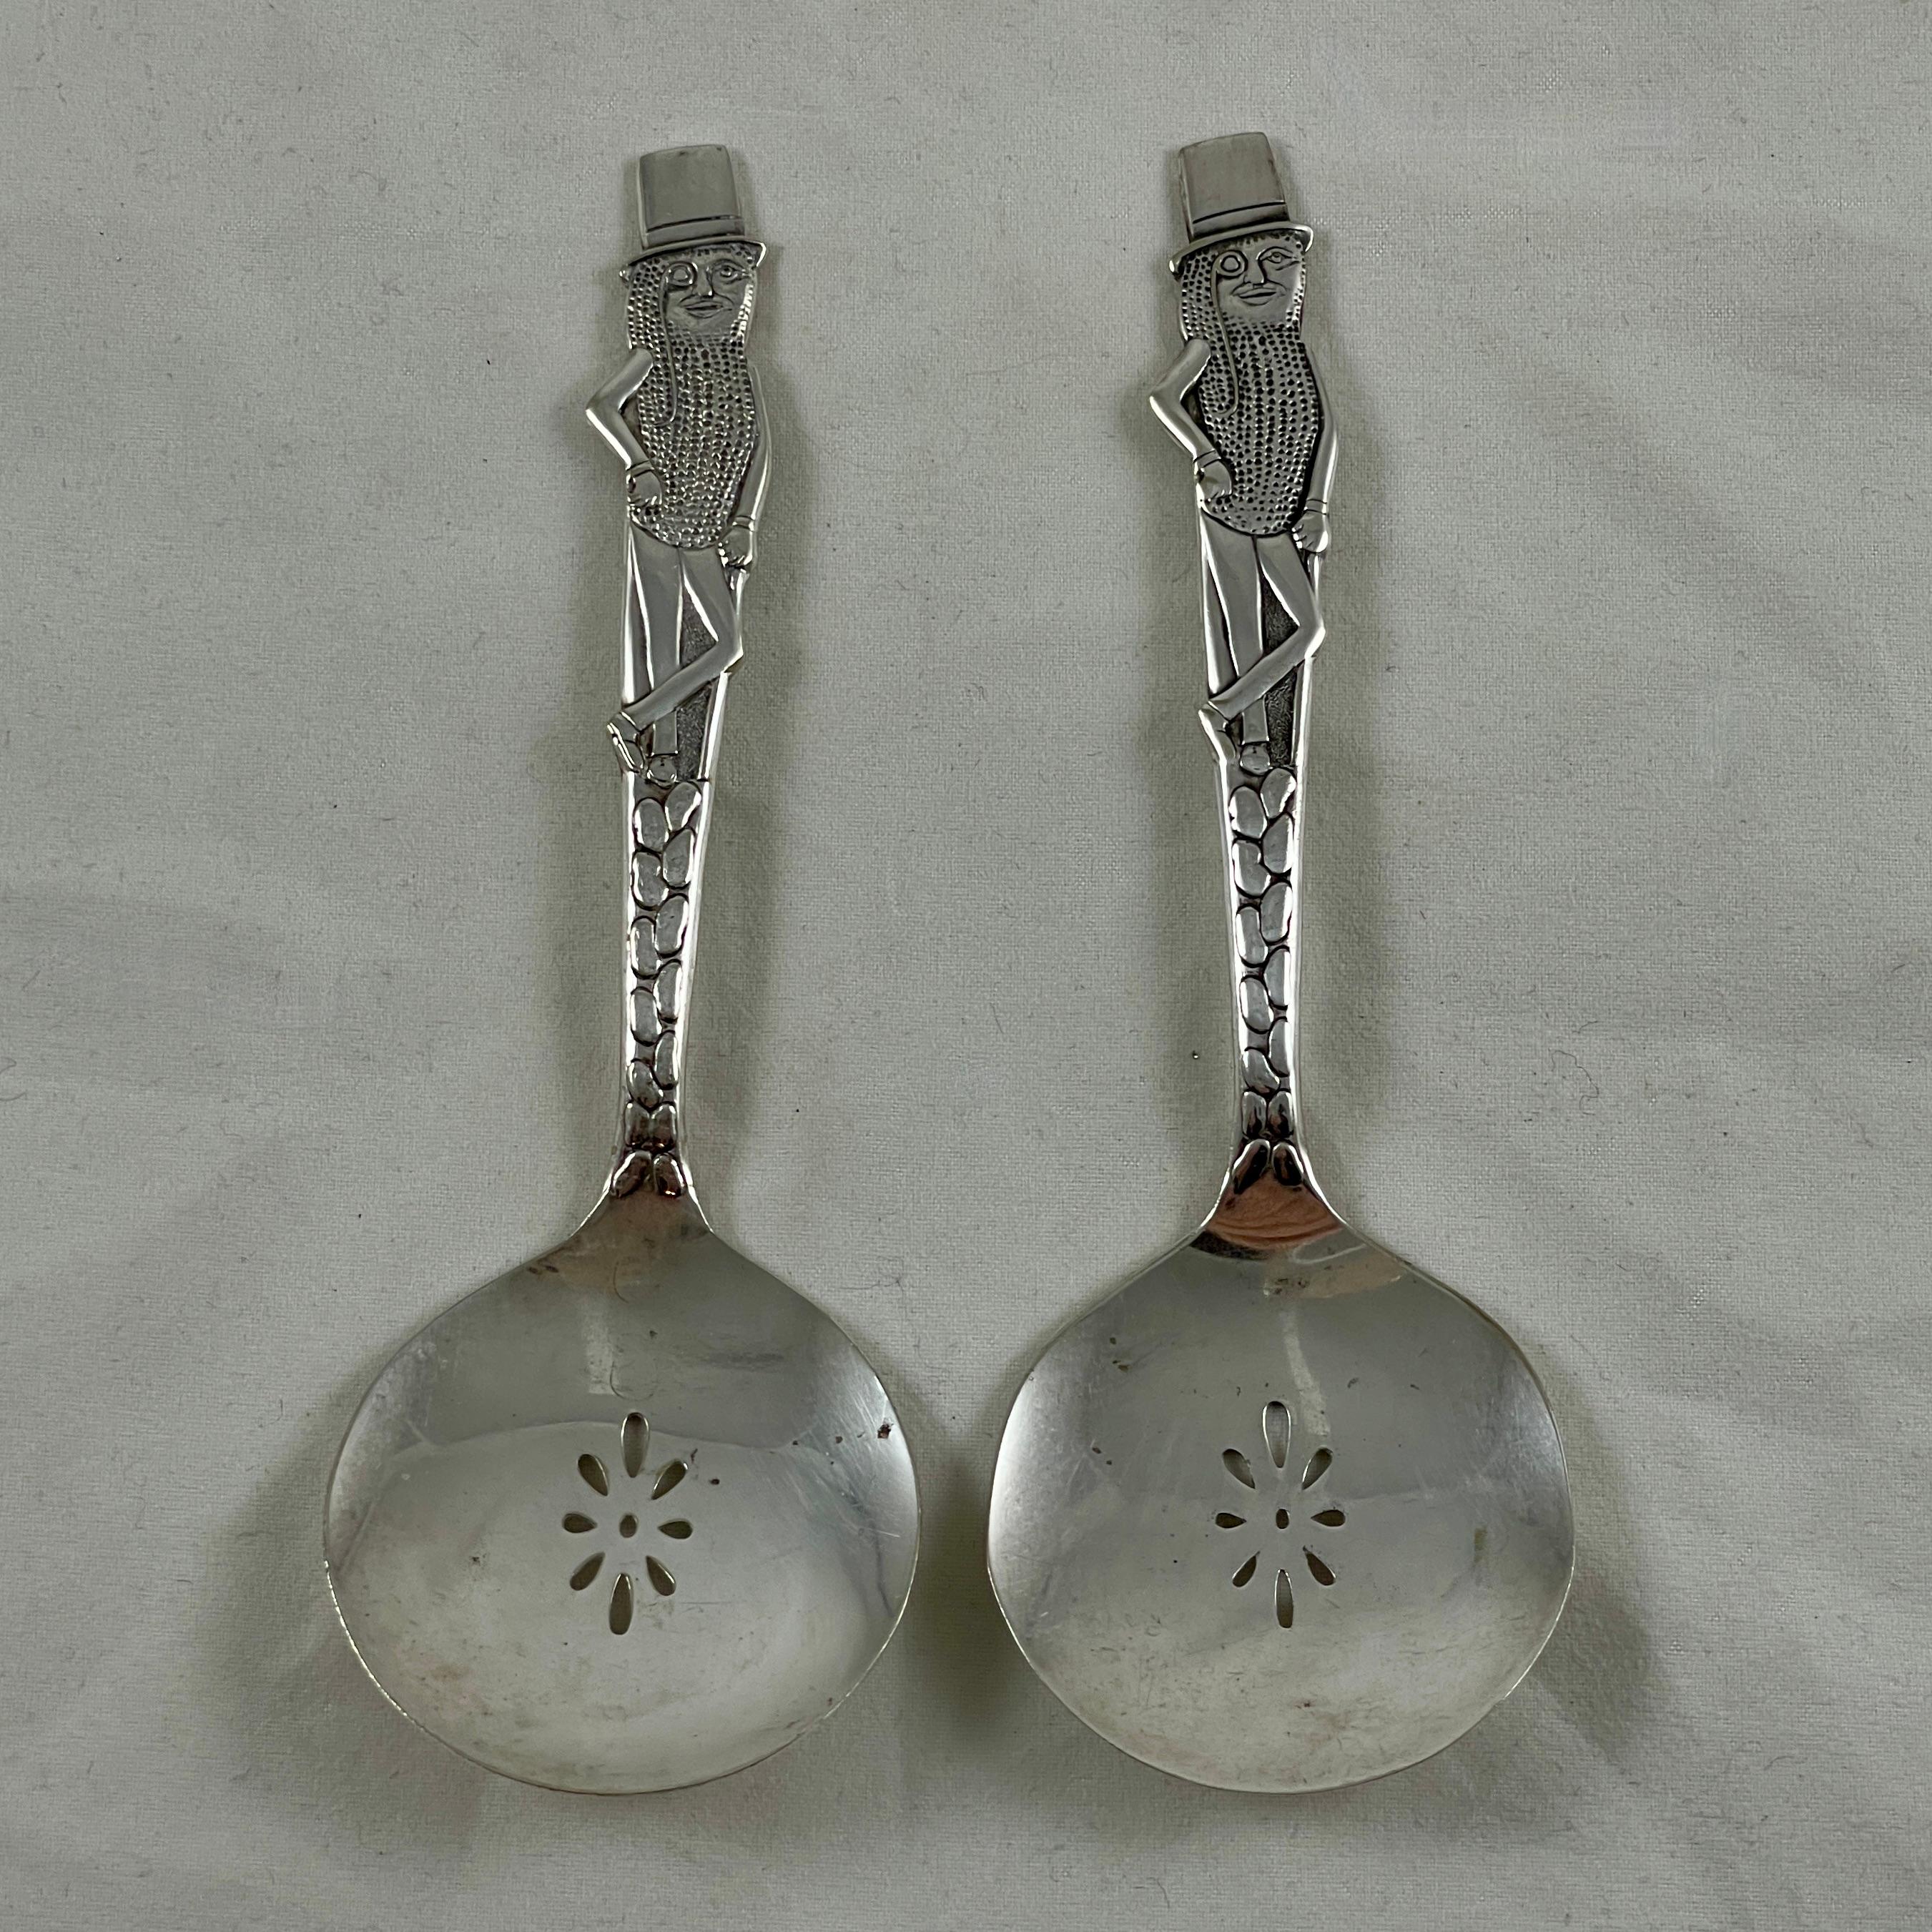 A pair of Mr. Peanut nut spoons, made by Carlton Silver Plate in 1941.

The spoon is detailed on both the front and back.

Mr. Peanut is the advertising logo and mascot of Planters, an American snack-food company. He is depicted as an